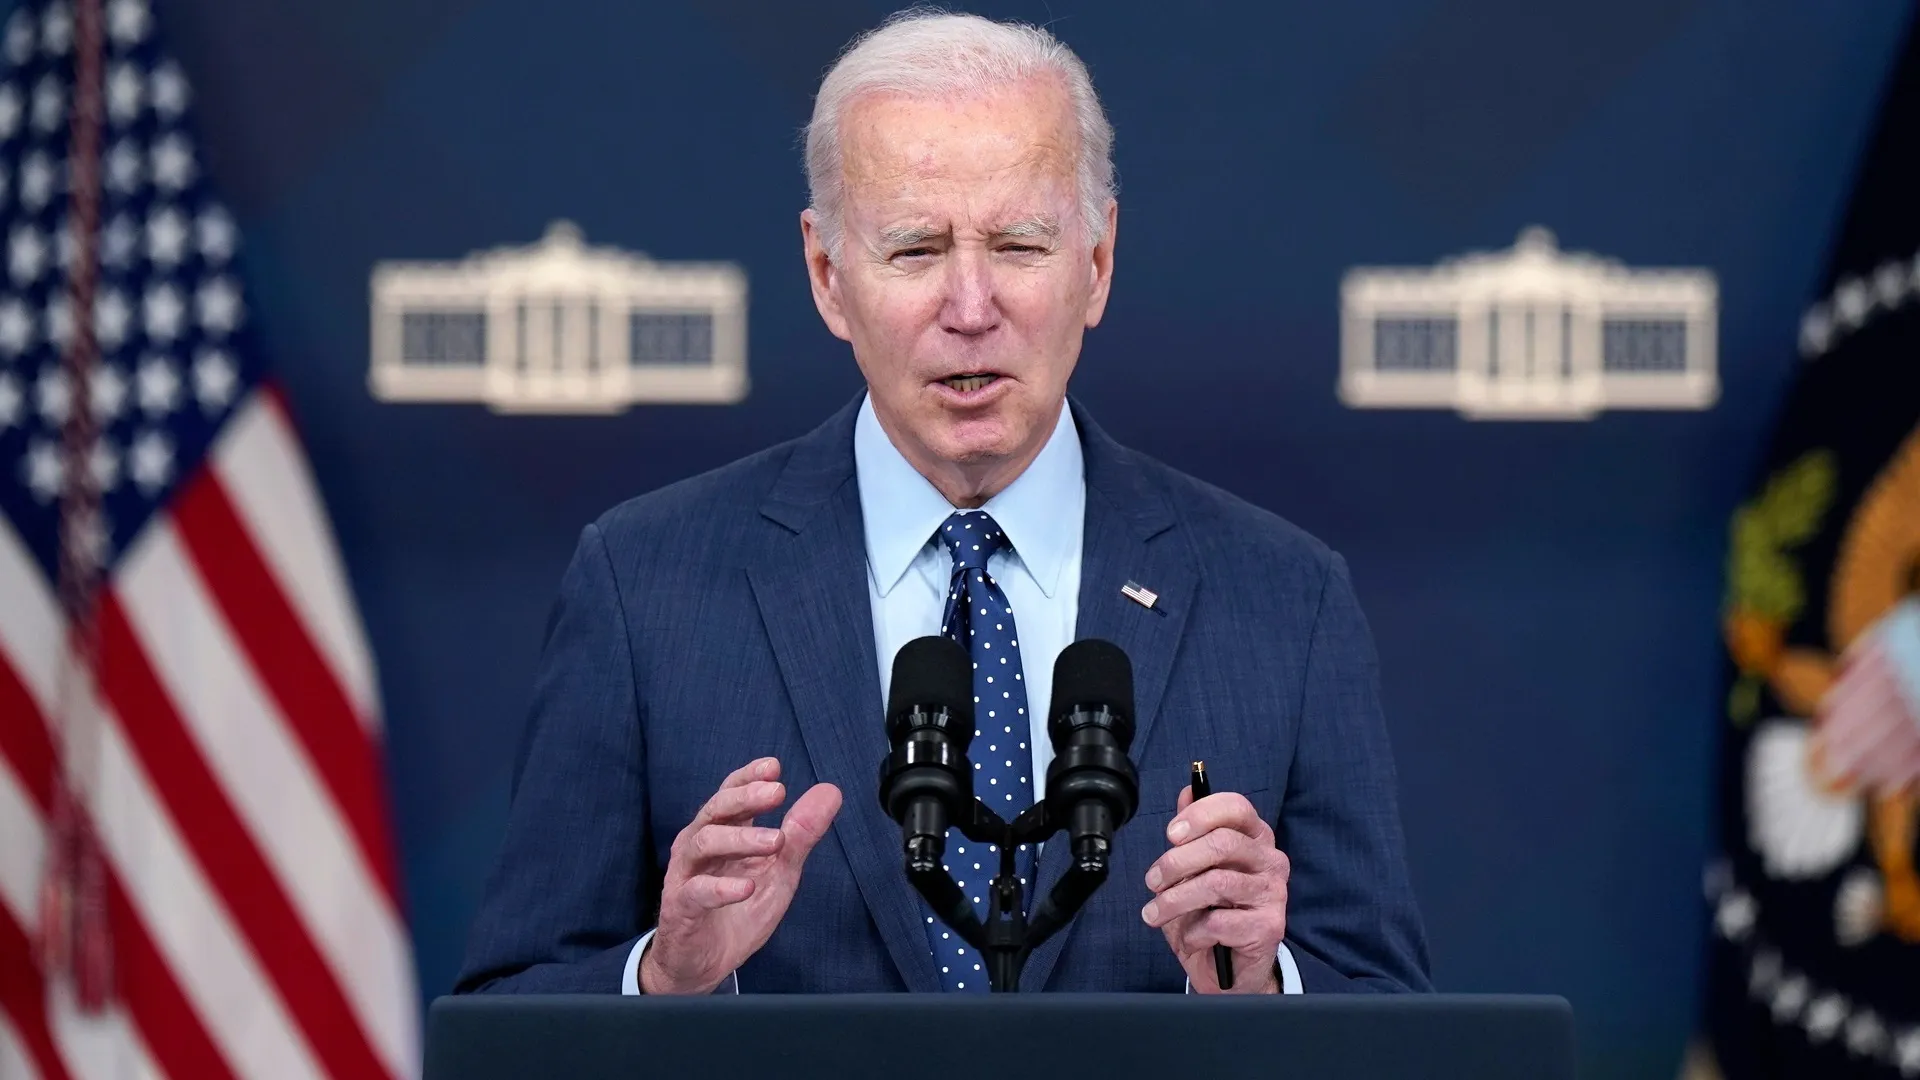 President Biden delivers remarks on US response to aerial objects, Washington, USA - 16 Feb 2023